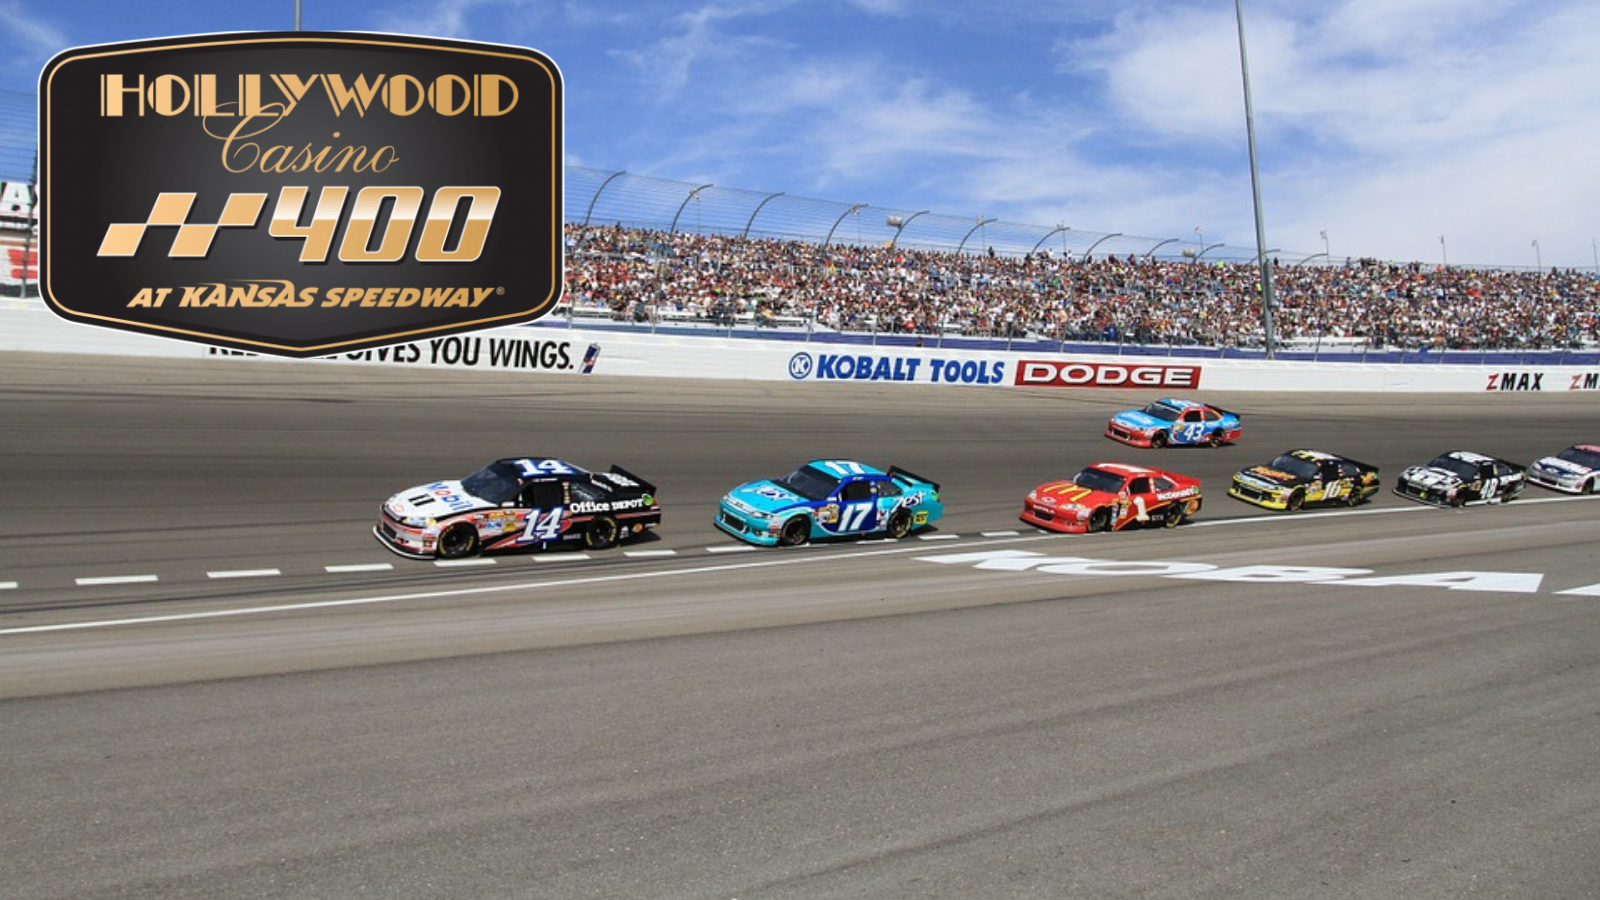 How to Watch Hollywood Casino 400 Online - Live Stream NASCAR